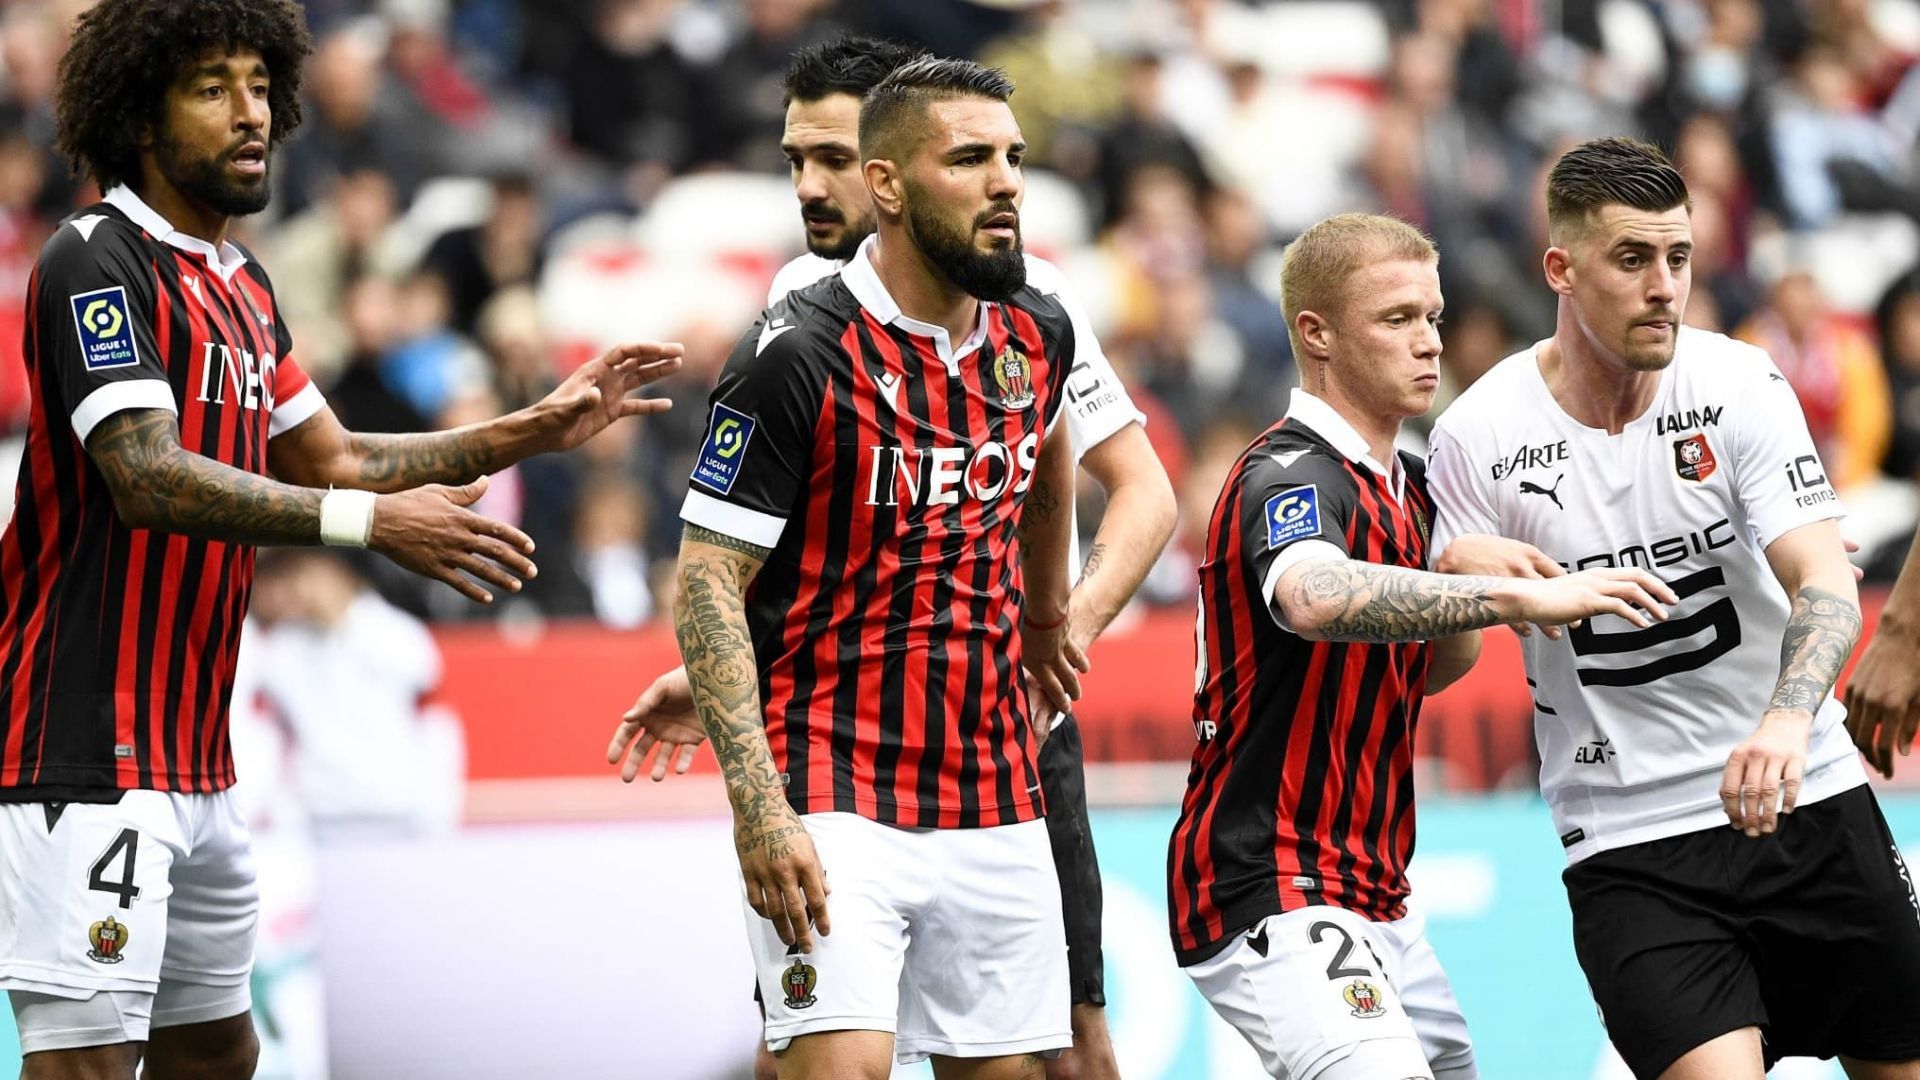 Rennes and Nice will meet in the Ligue 1 on Monday